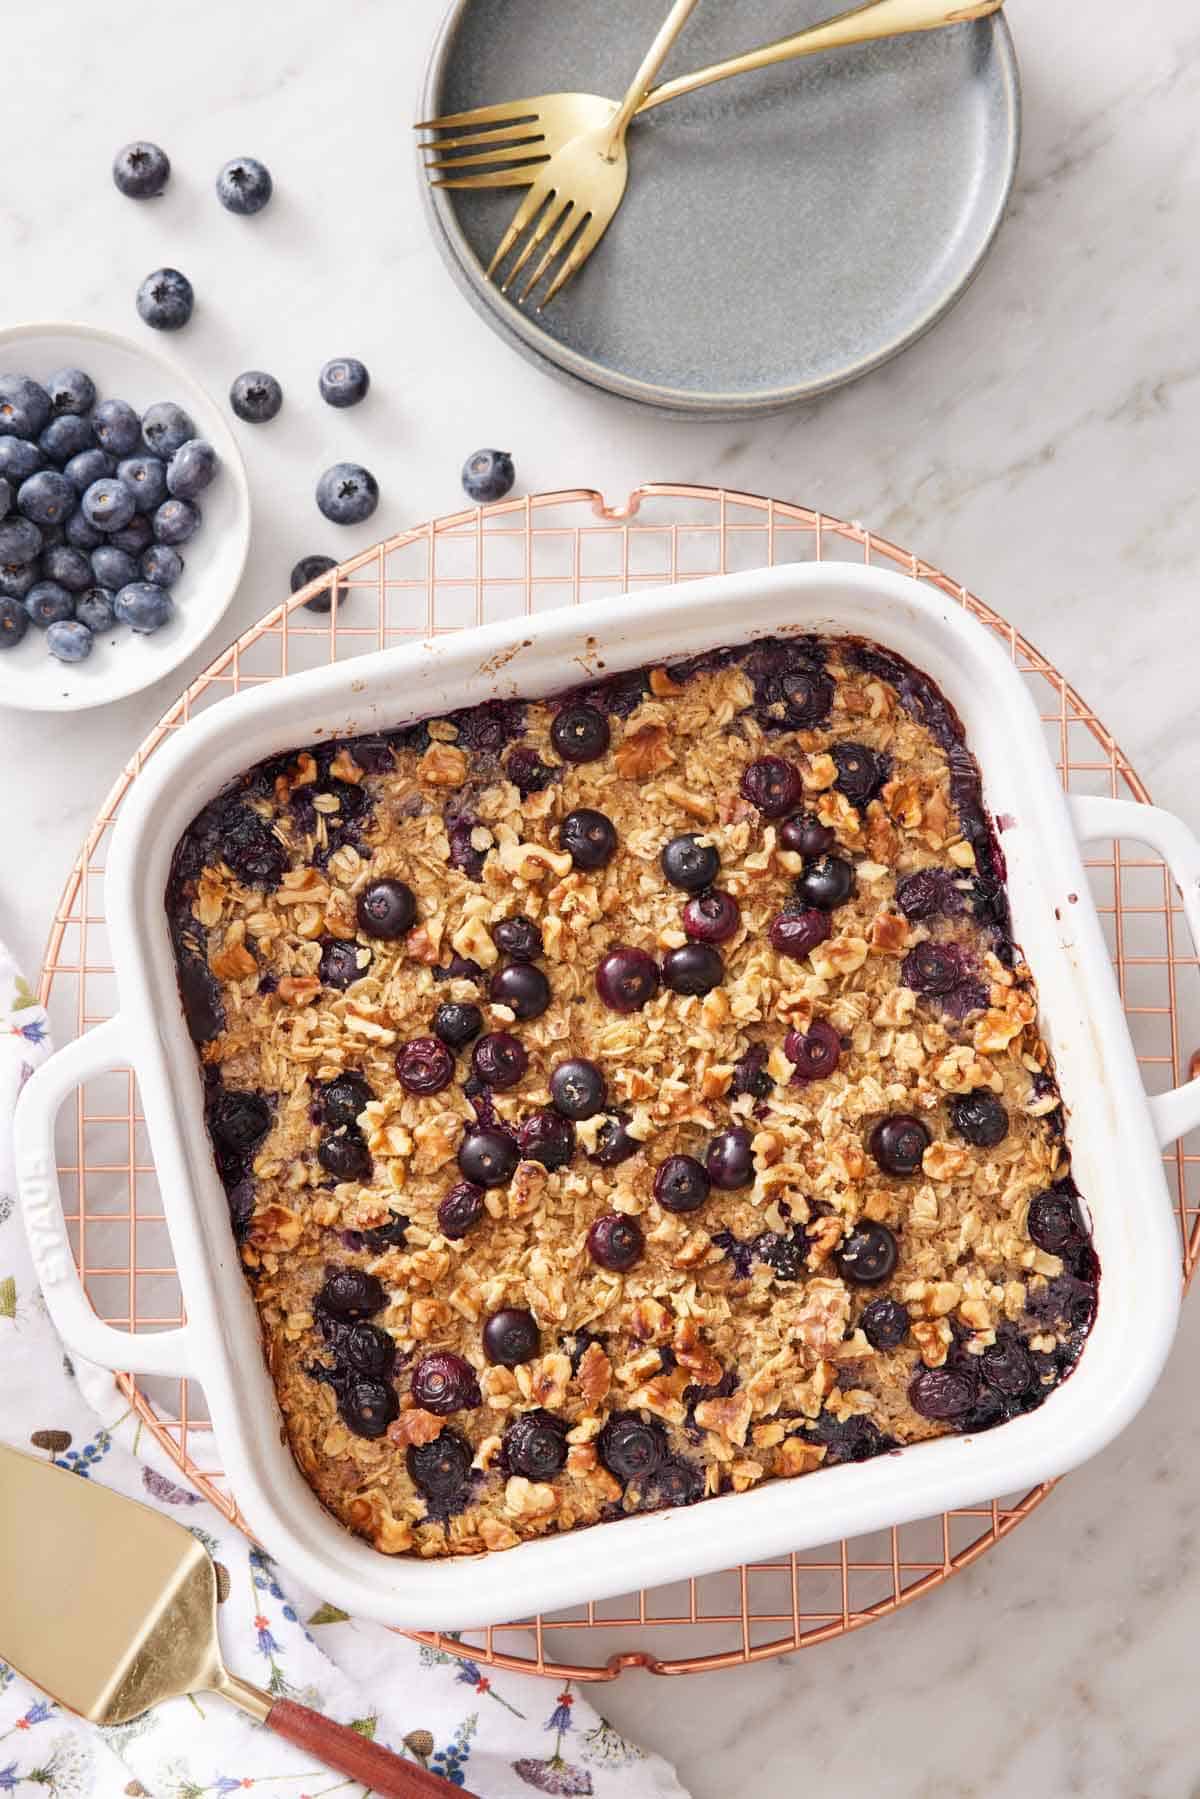 Overhead view of a white baking dish with baked oatmeal on a cooling rack with a bowl of blueberries beside it with some scattered. Forks and plates beside it.